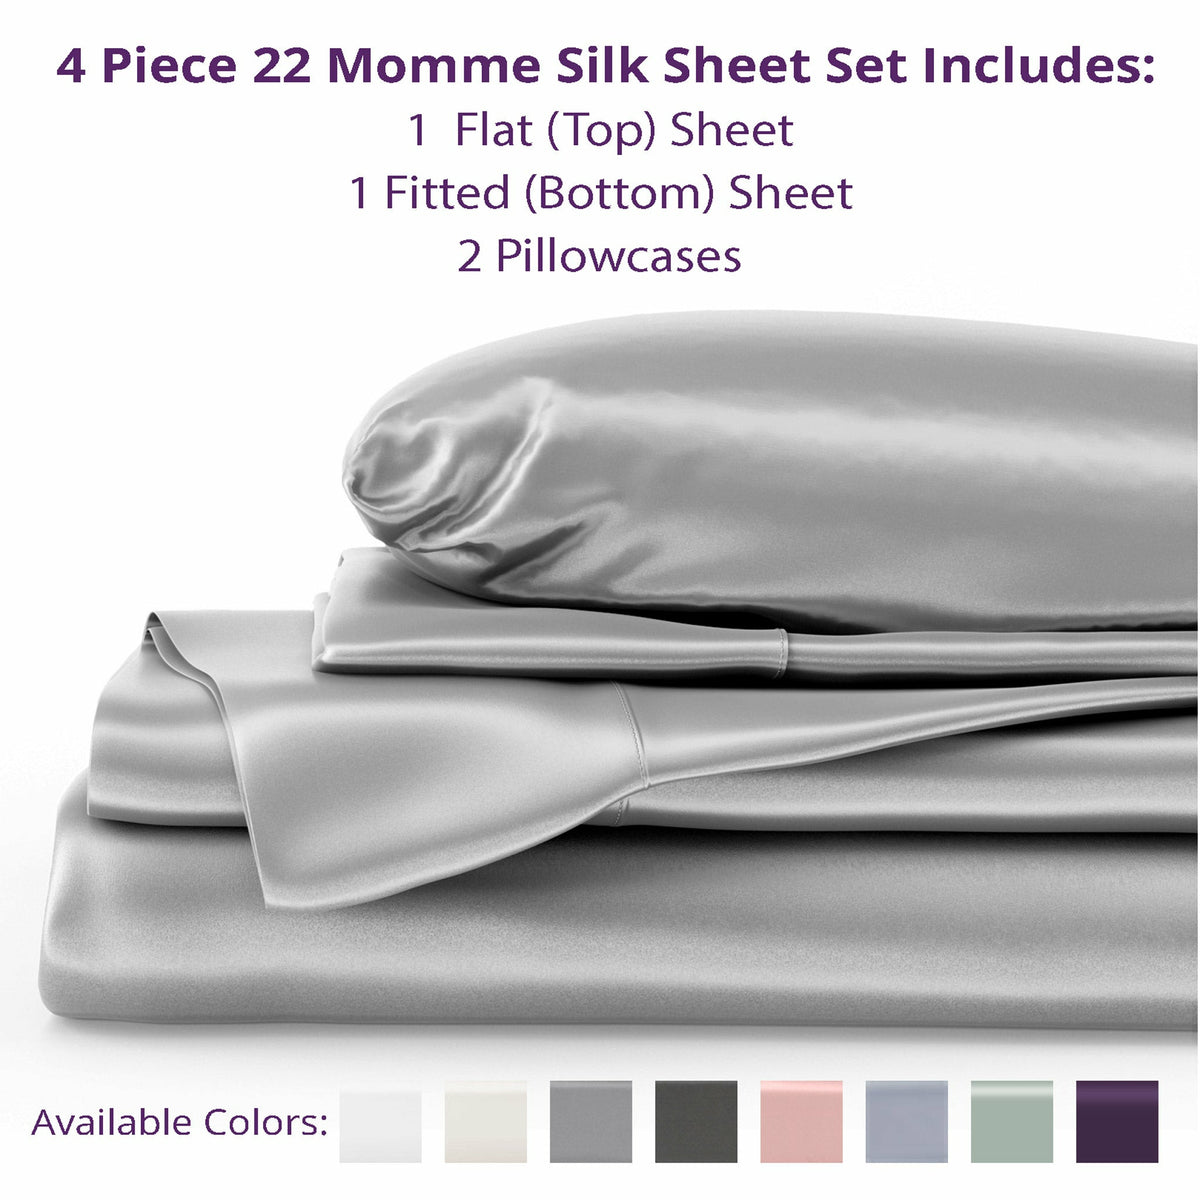 Mulberry Park Silks 22 Momme Silk Fitted Sheets Inclusions Silver Fine Linens